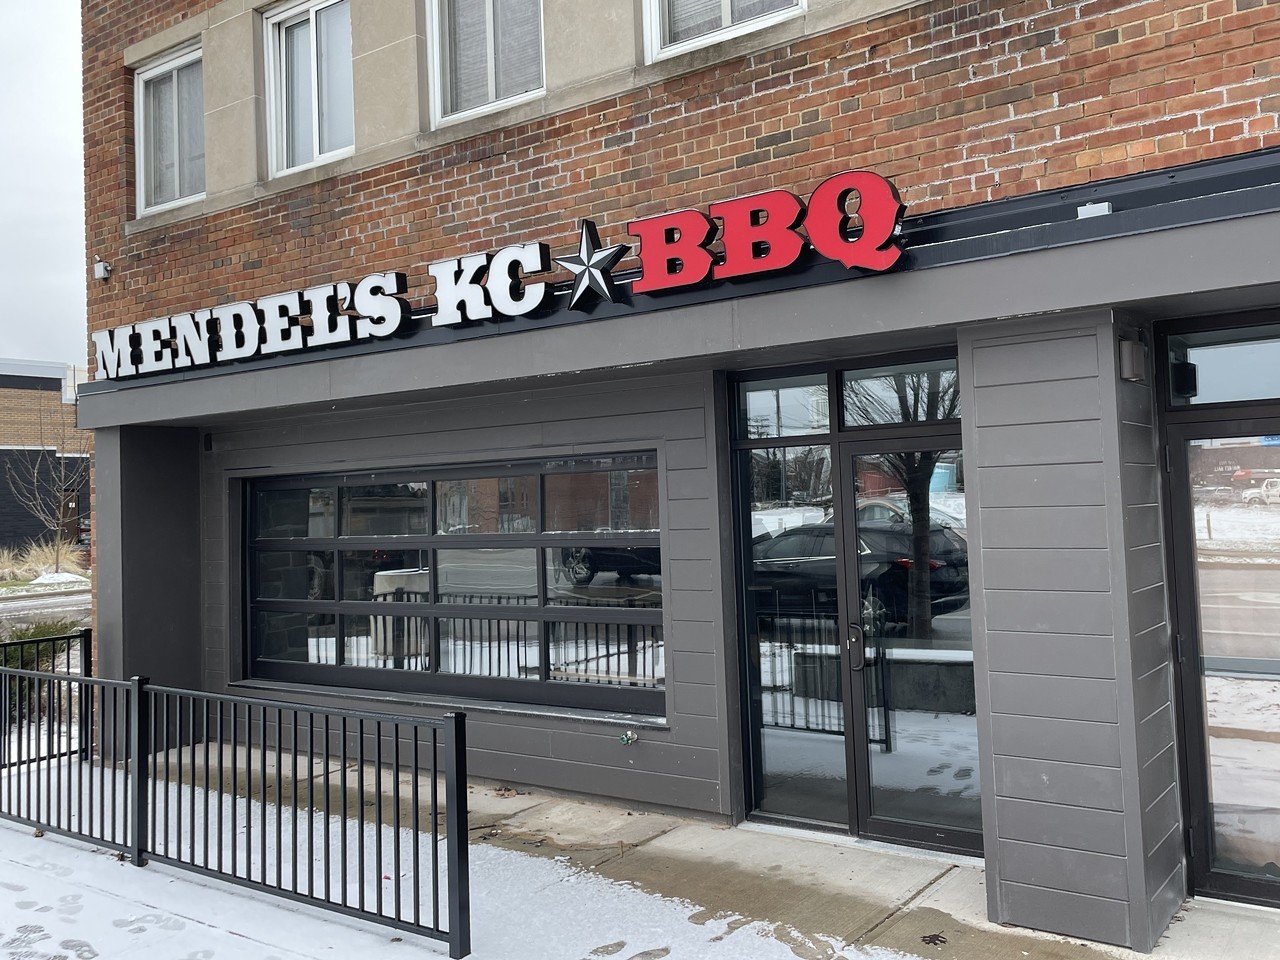 Mendel's Kansas City BBQ
20314 Chagrin Blvd, Shaker Heights
Like his Miami restaurant, Mendel’s Backyard BBQ, Mendel Segal is proving that kosher and barbecue can indeed coexist. This January Mendel’s Kansas City BBQ opened its doors in Shaker Heights, across Chagrin Boulevard from Van Aken District. The 80-seat restaurant is full-service, but family-friendly. And with items like brisket, smoked pastrami, giant beef ribs, beef back ribs, smoked veal brisket, lamb ribs, smoked turkey, burnt ends and smoked chicken, few diners will miss the pork.